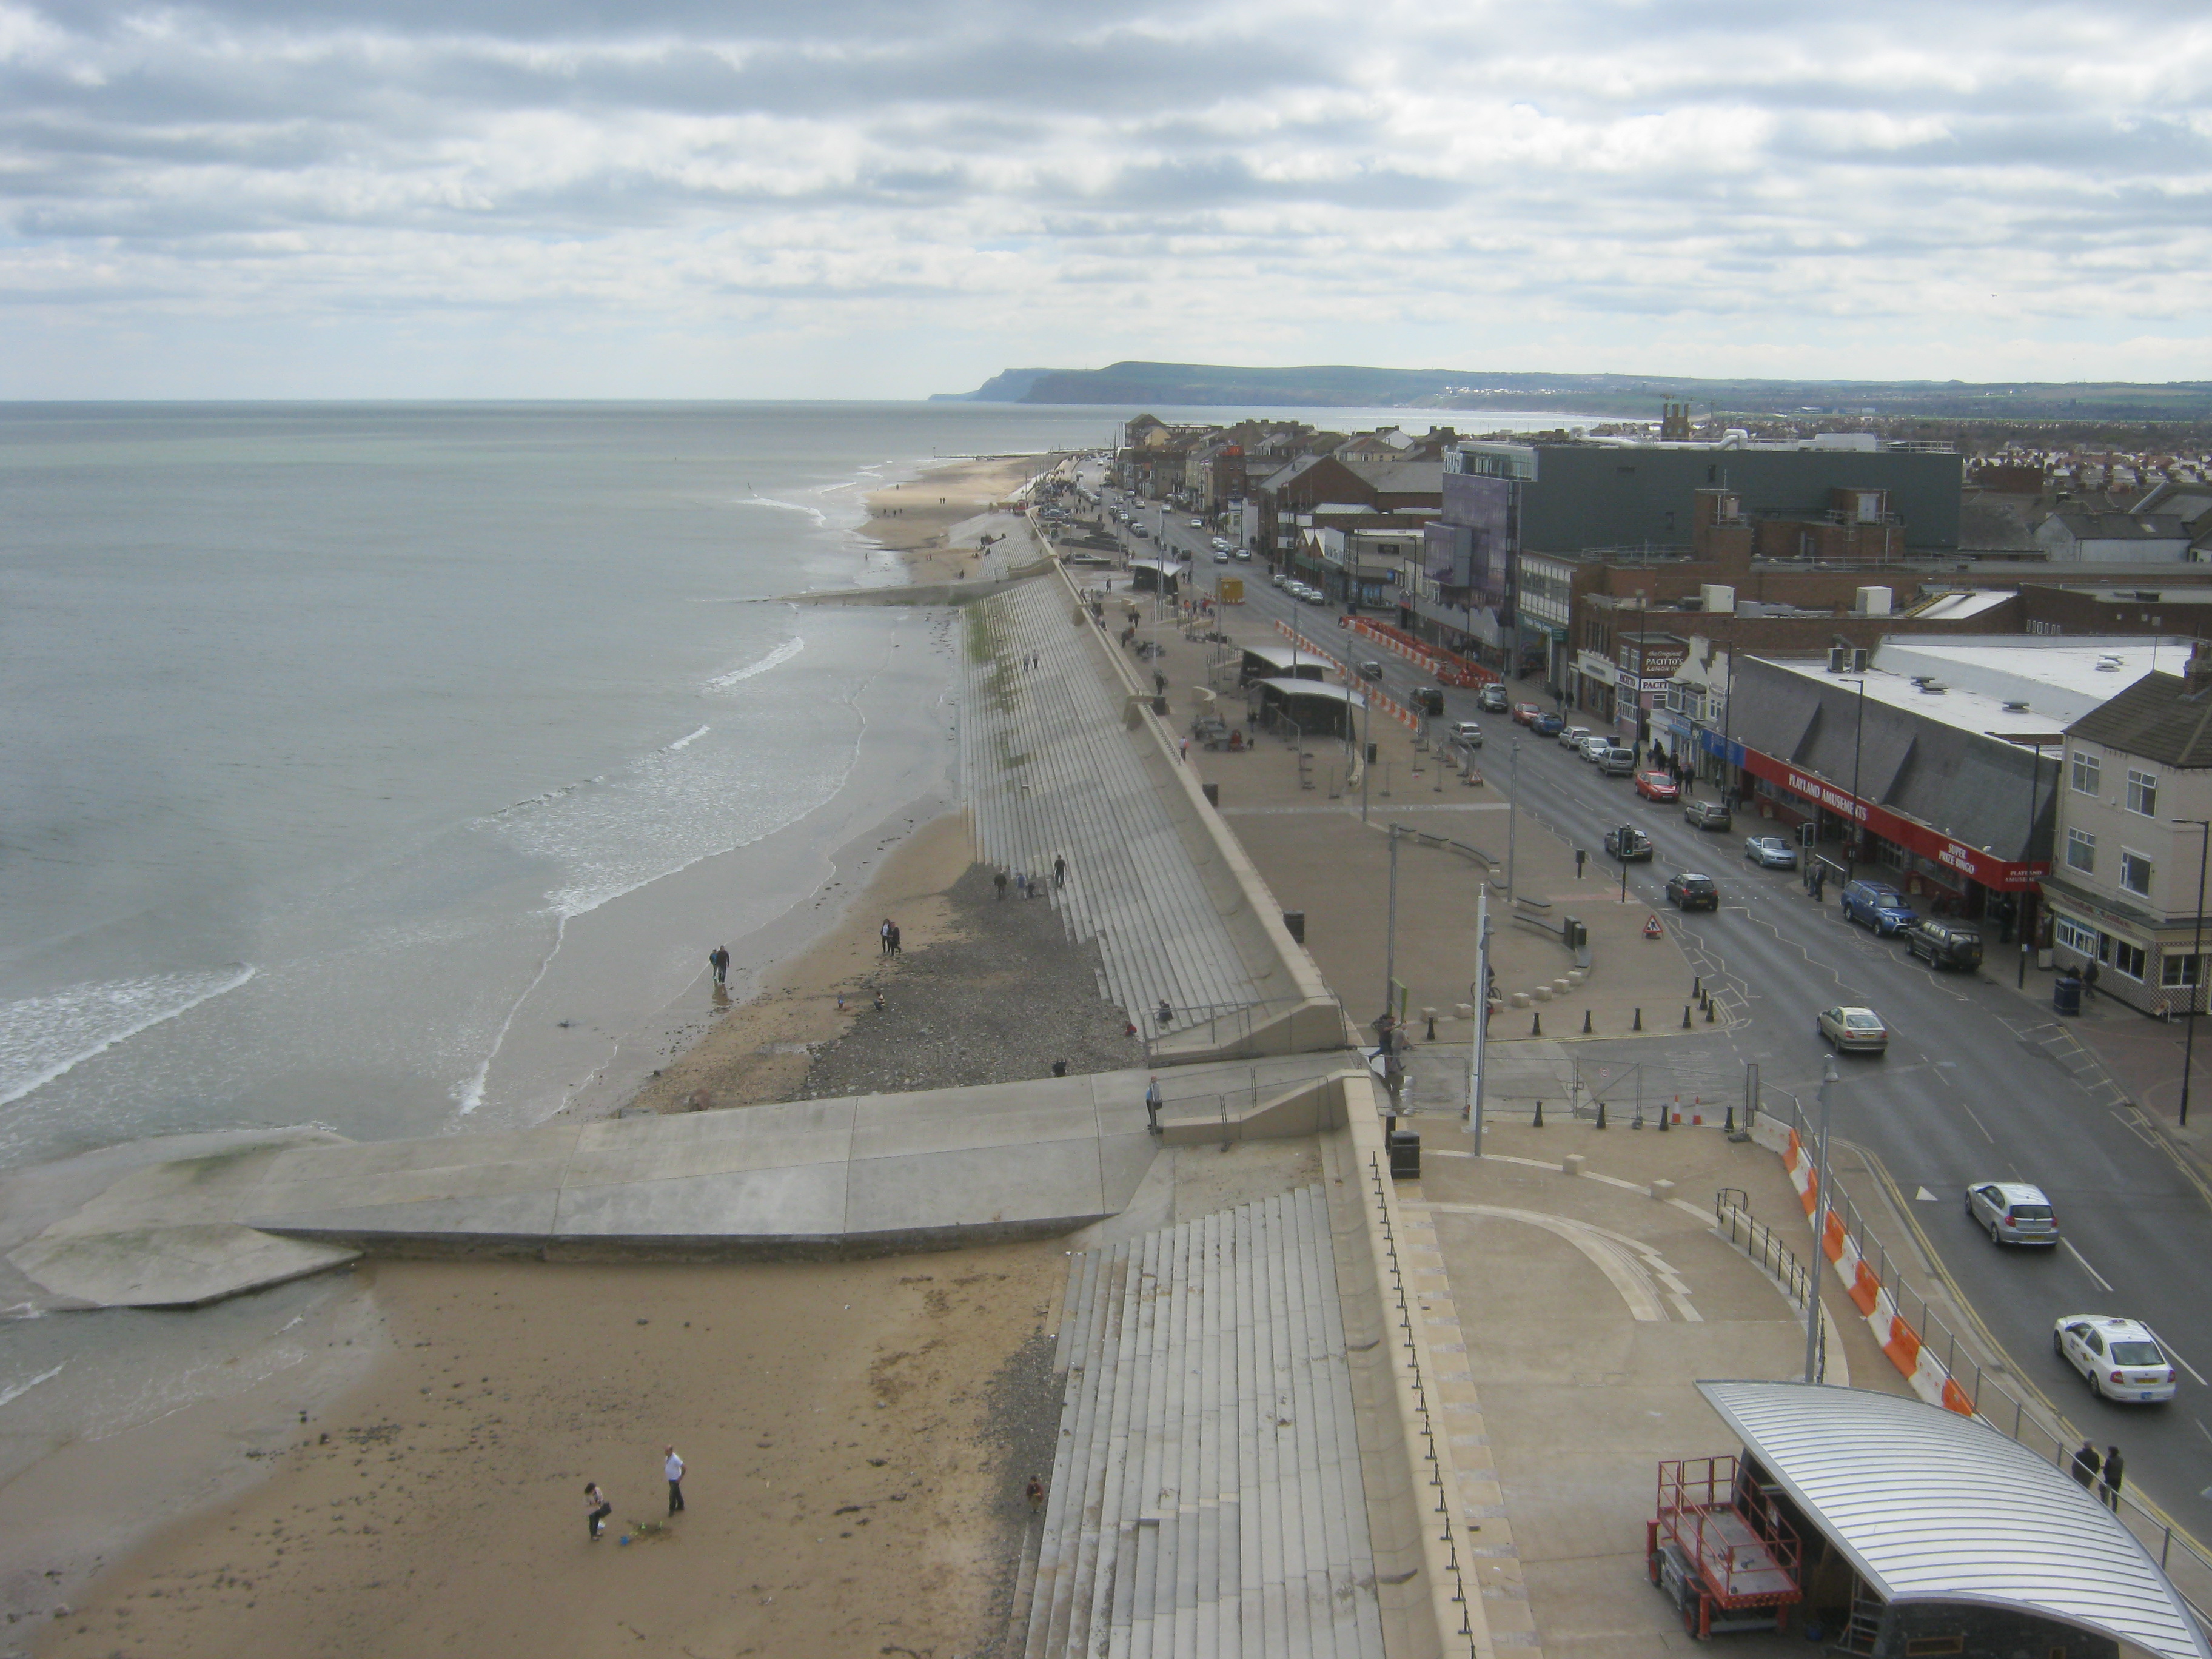 Redcar and Cleveland